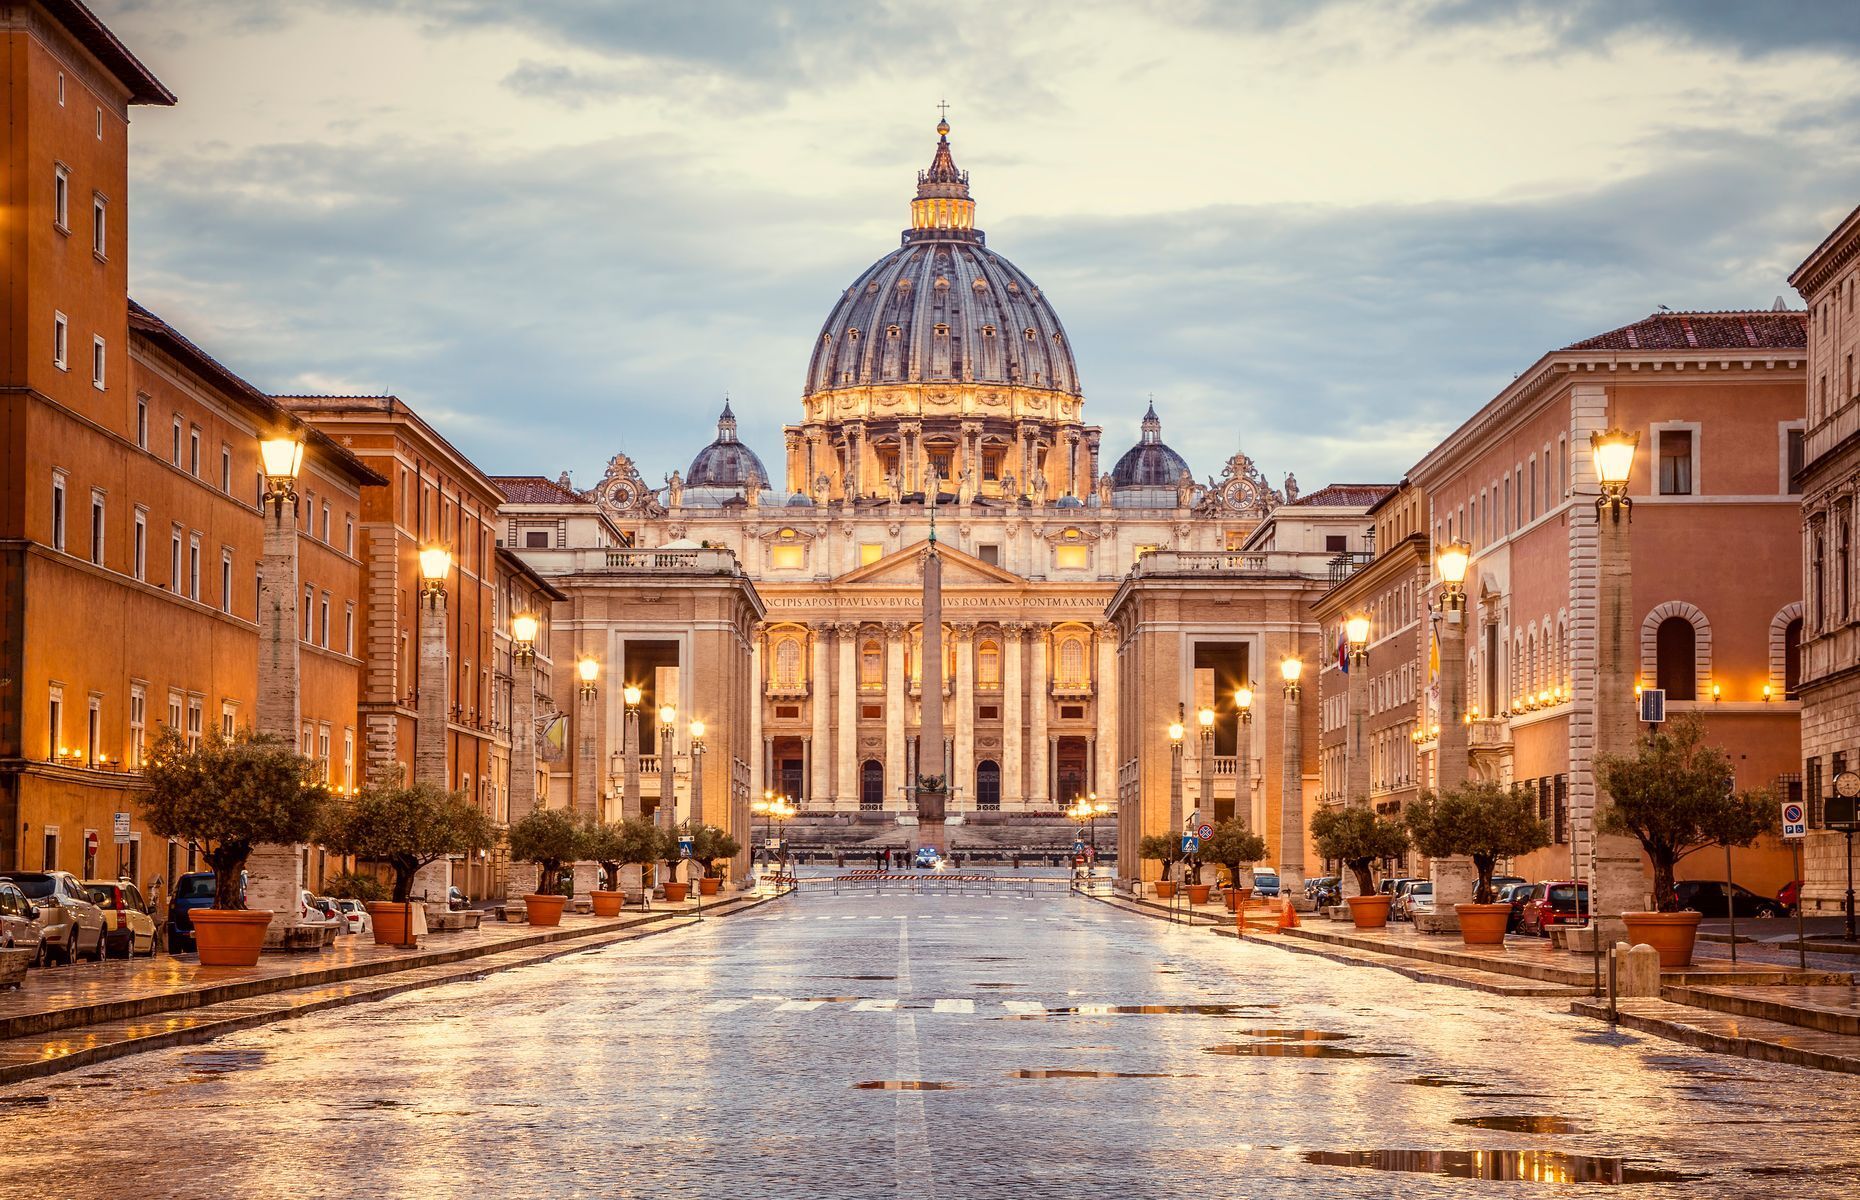 <p>St. Peter’s Basilica, <a href="https://www.rome-museum.com/st-peters-basilica.php" rel="noreferrer noopener">one of the largest buildings on the planet</a>, stands at the heart of Catholicism’s world headquarters. This pilgrimage site draws <a href="http://www.papalaudience.org/papal-mass" rel="noreferrer noopener">thousands of worshippers every Sunday to hear the Pope’s Angelus</a>, either in the church itself or St. Peter’s Square. The basilica also attracts lovers of Renaissance art, exemplified by the famous <a href="https://www.architecturaldigest.com/story/how-michelangelo-spent-final-years-designing-st-peters-basilica-rome" rel="noreferrer noopener">dome designed by Michelangelo</a>.</p>